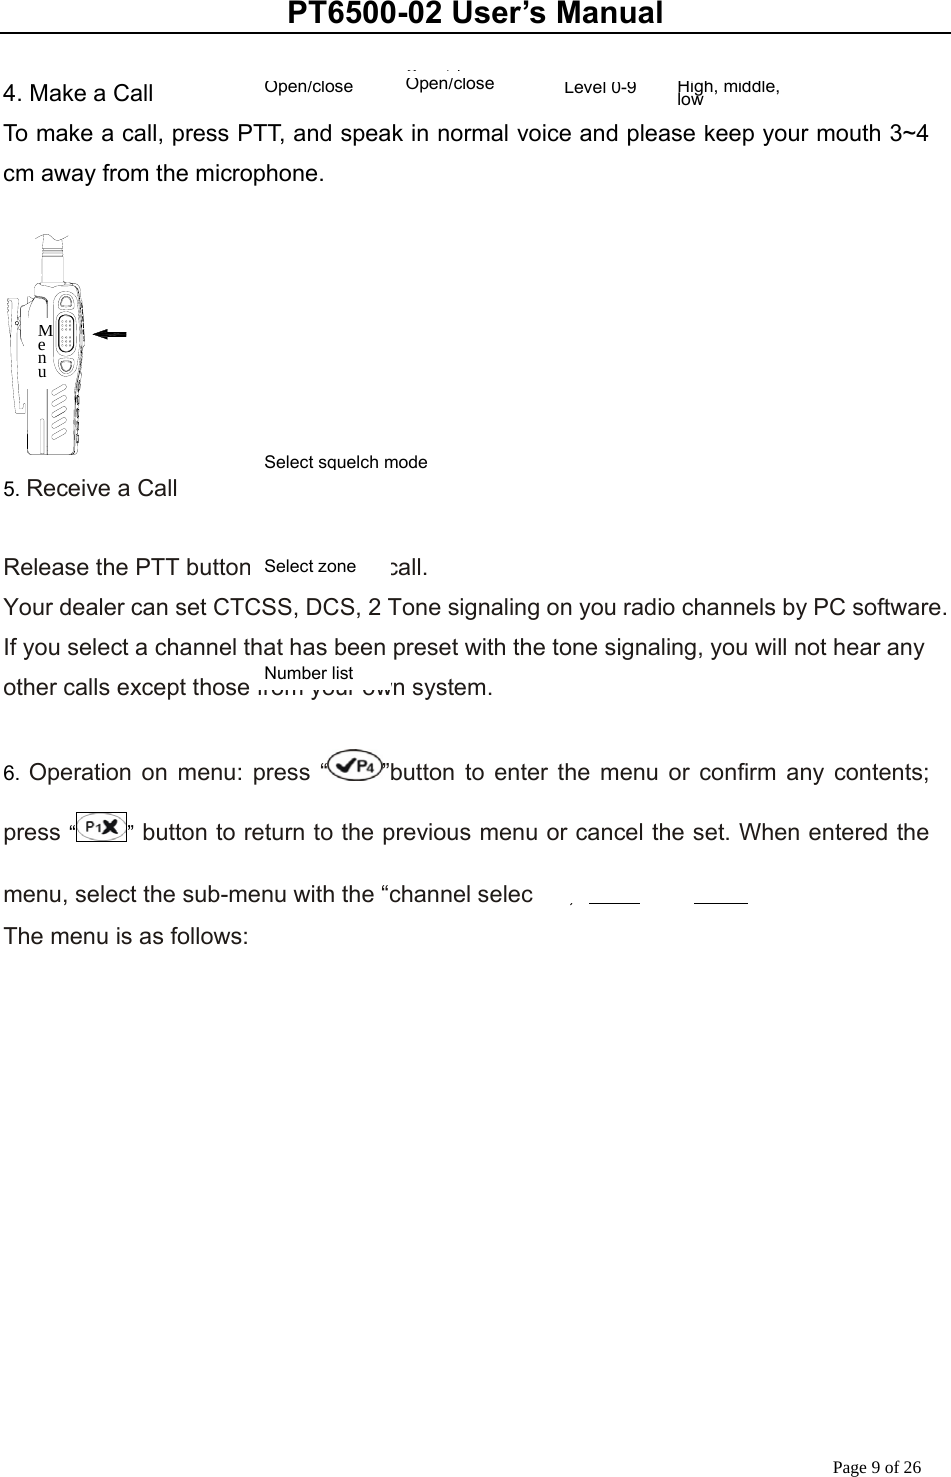 PT6500-02 User’s Manual Page 9 of 26  4. Make a Call To make a call, press PTT, and speak in normal voice and please keep your mouth 3~4 cm away from the microphone.   5. Receive a Call  Release the PTT button to receive a call.   Your dealer can set CTCSS, DCS, 2 Tone signaling on you radio channels by PC software. If you select a channel that has been preset with the tone signaling, you will not hear any other calls except those from your own system.  6.  Operation on menu: press “ ”button to enter the menu or confirm any contents; press “ ” button to return to the previous menu or cancel the set. When entered the menu, select the sub-menu with the “channel selector”, “  “or “ ”. The menu is as follows:  Open/closeOpen/closeOpen/closeOpen/closeLevel 0-9High, middle, low  Menu Select squelch modeNumber listSelect zone   